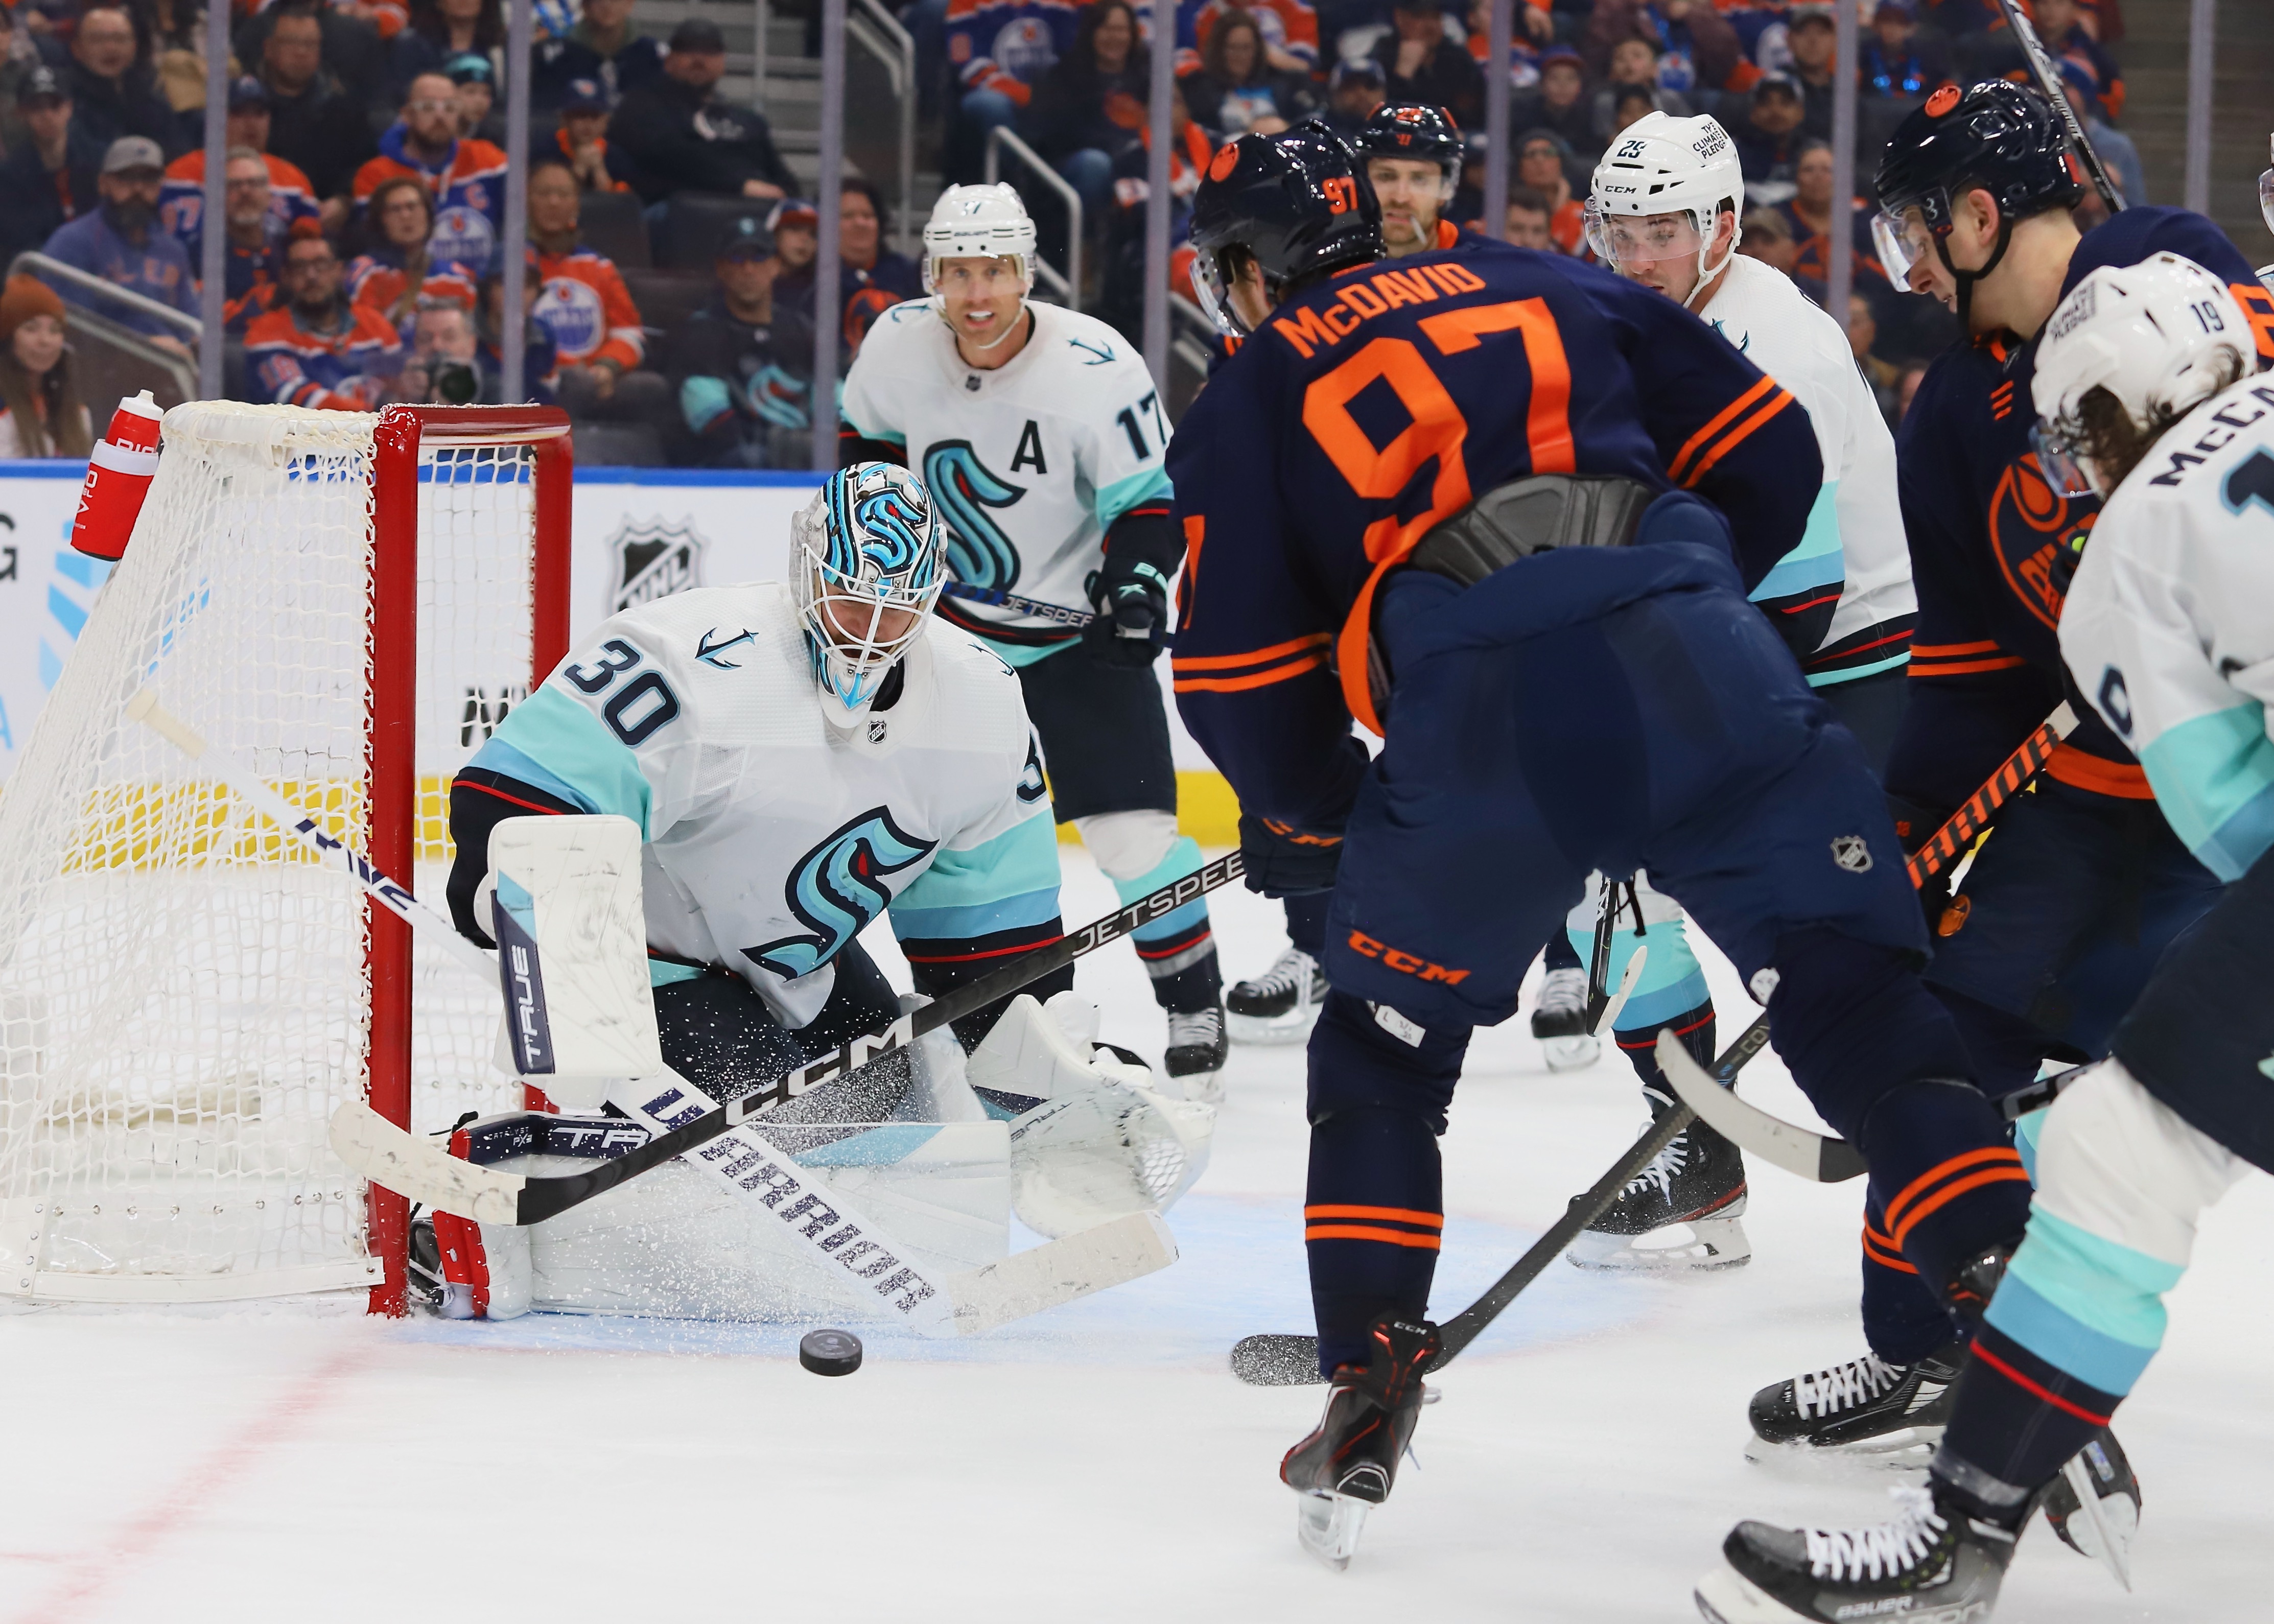 Martin Jones stops a shot against Connor McDavid. Jones is angled facing toward the camera, in a Kraken white away jersey, and McDavid has his back to the camera, in the Oilers’ navy alternate jersey